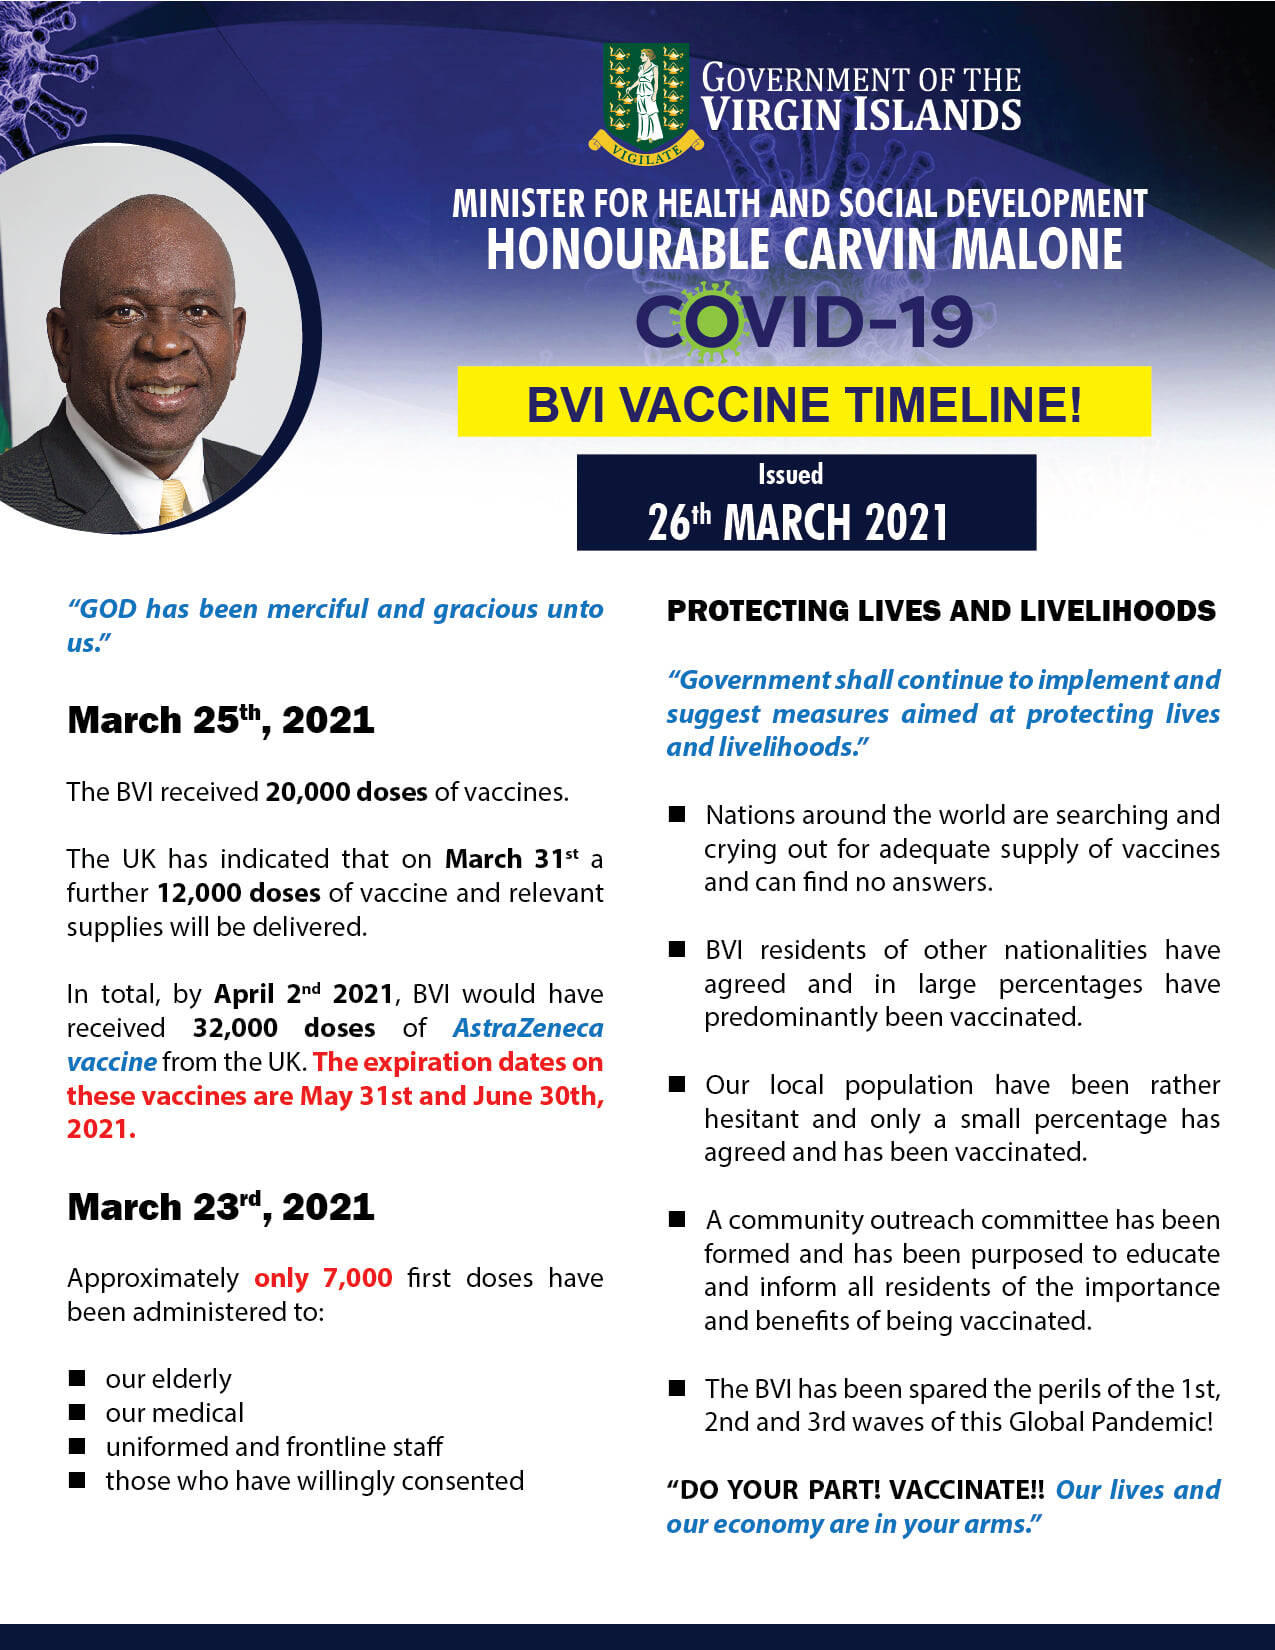 Attached picture C-Malone Update on Vaccination in BVI - 26-March-2021.jpg